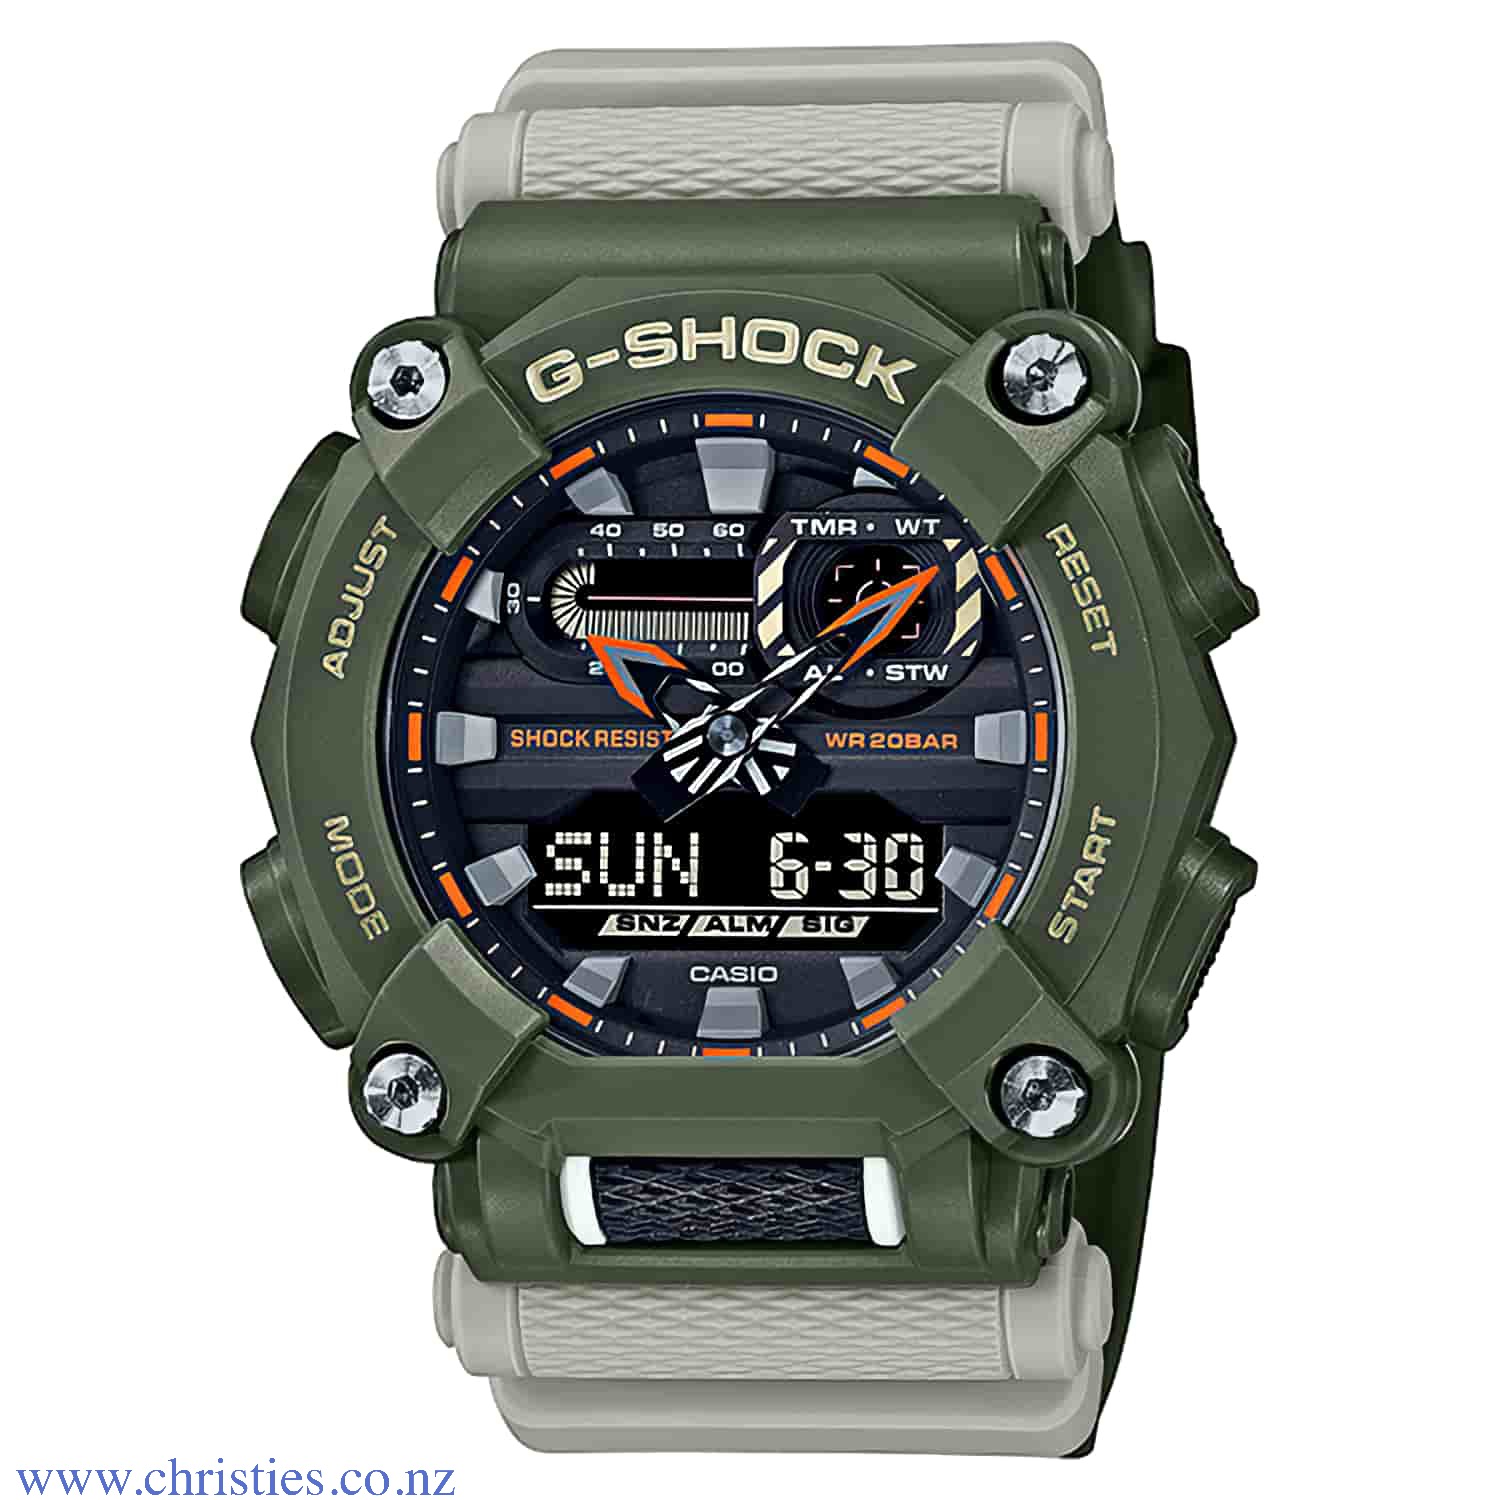 GA900HC-3A Casio G-Shock Watch Hidden Coast Series. HIDDEN COAST Theme Series - This new colour model was designed under the theme of exploration of an unknown coastal region. This new lineup is based on the powerful GA-900. The GA-900HC is made entirely 